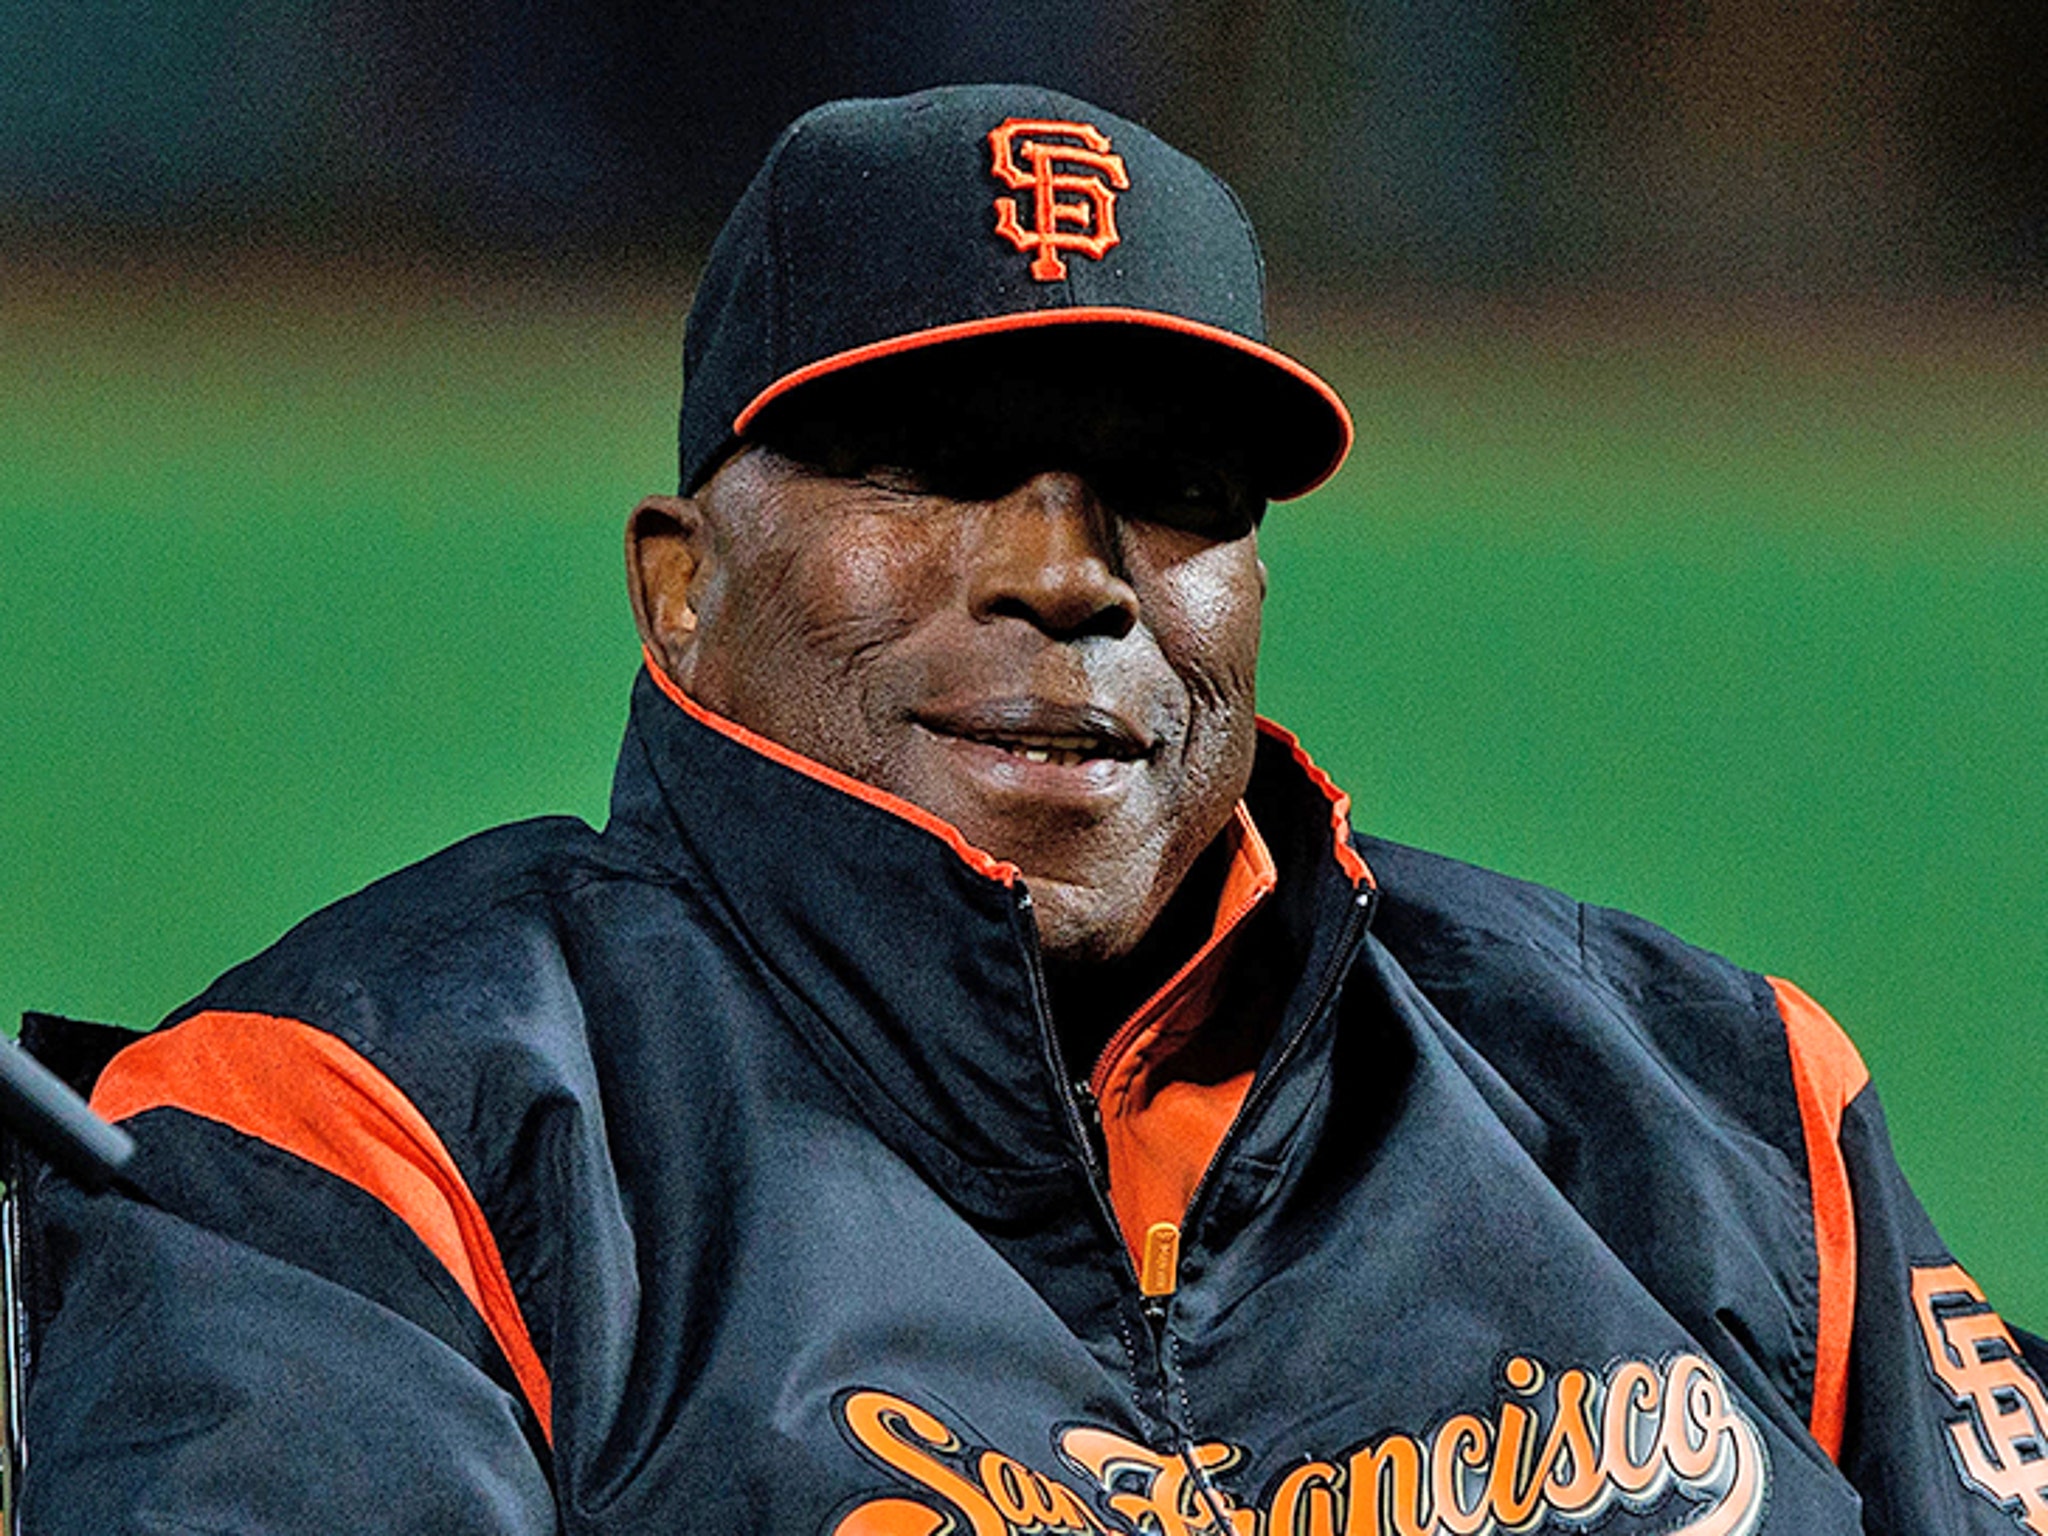 Giants Hall of Famer Willie McCovey dies at age 80